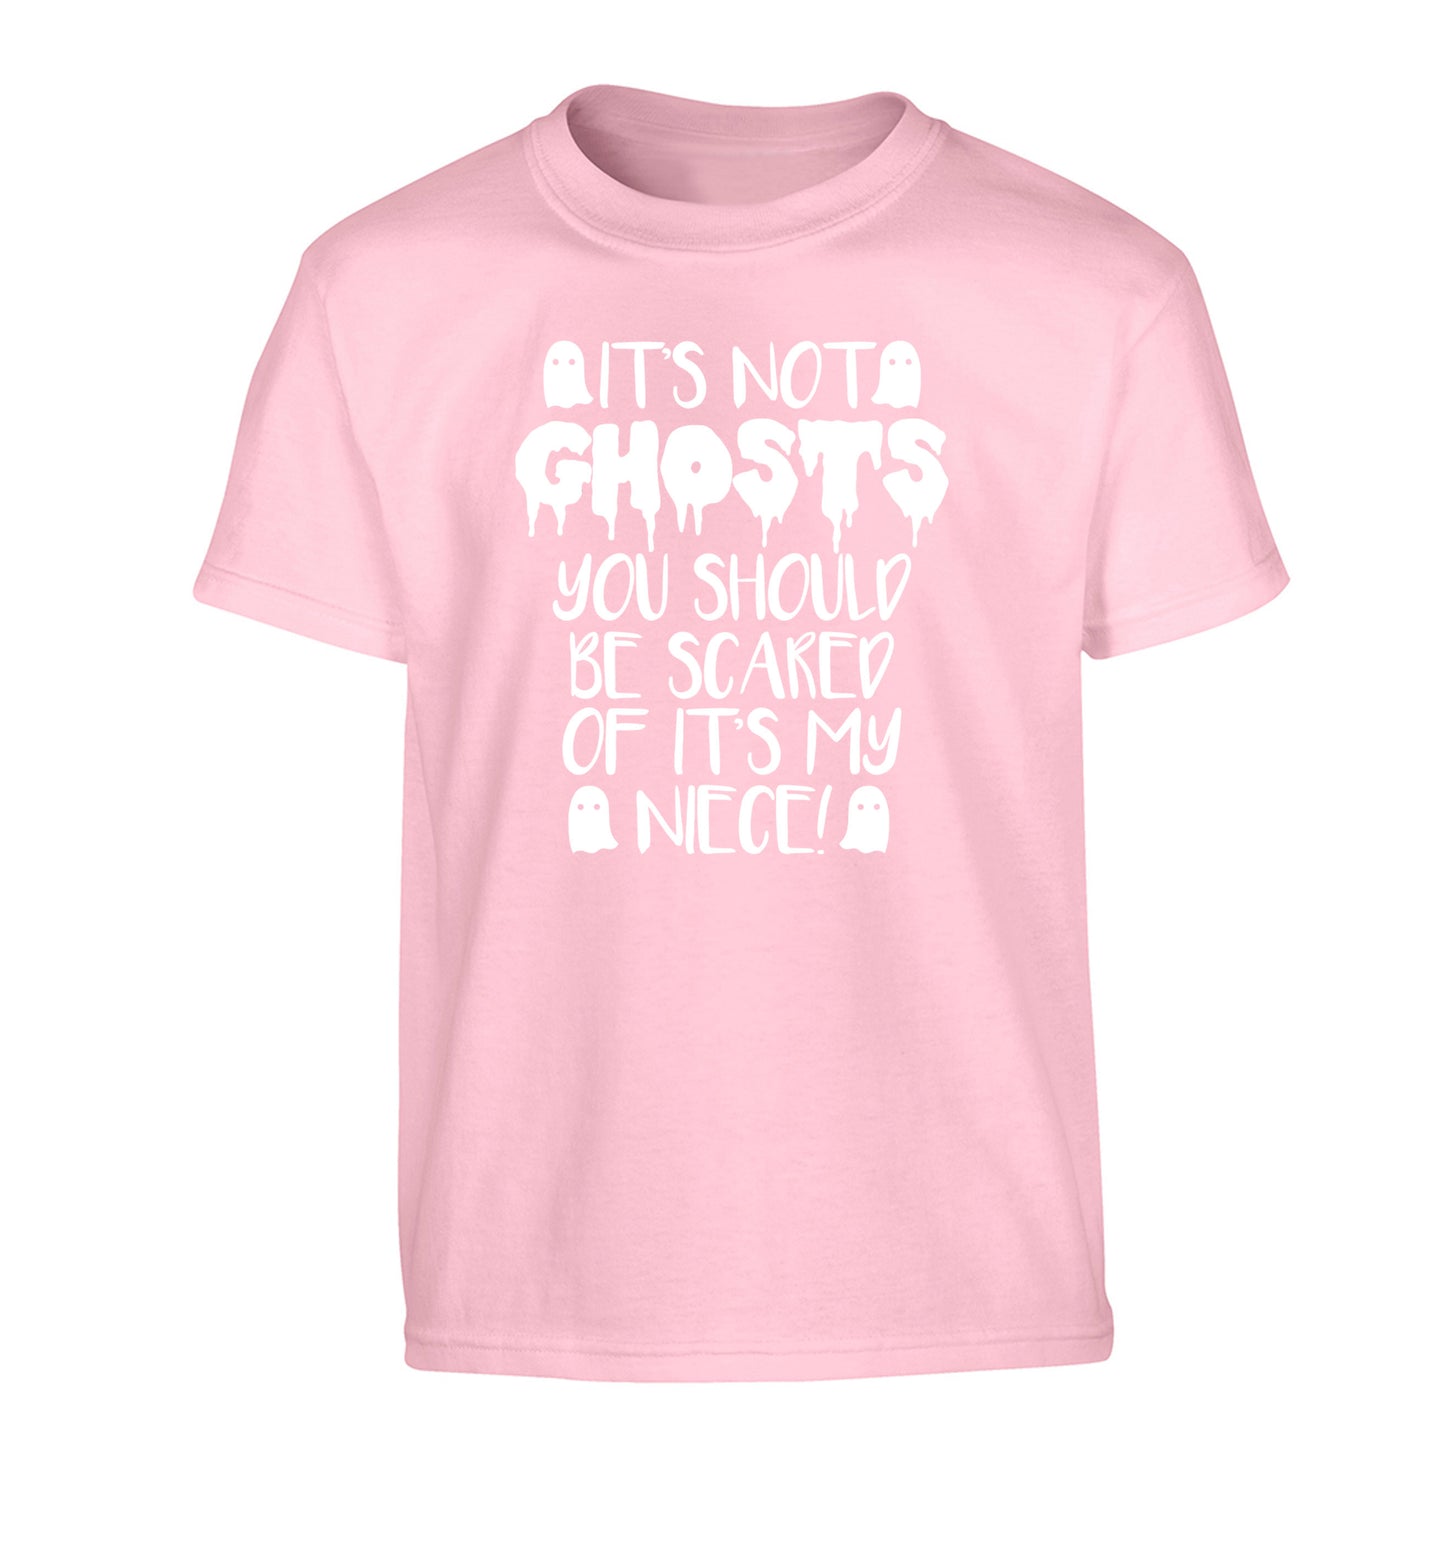 It's not ghosts you should be scared of it's my niece! Children's light pink Tshirt 12-14 Years